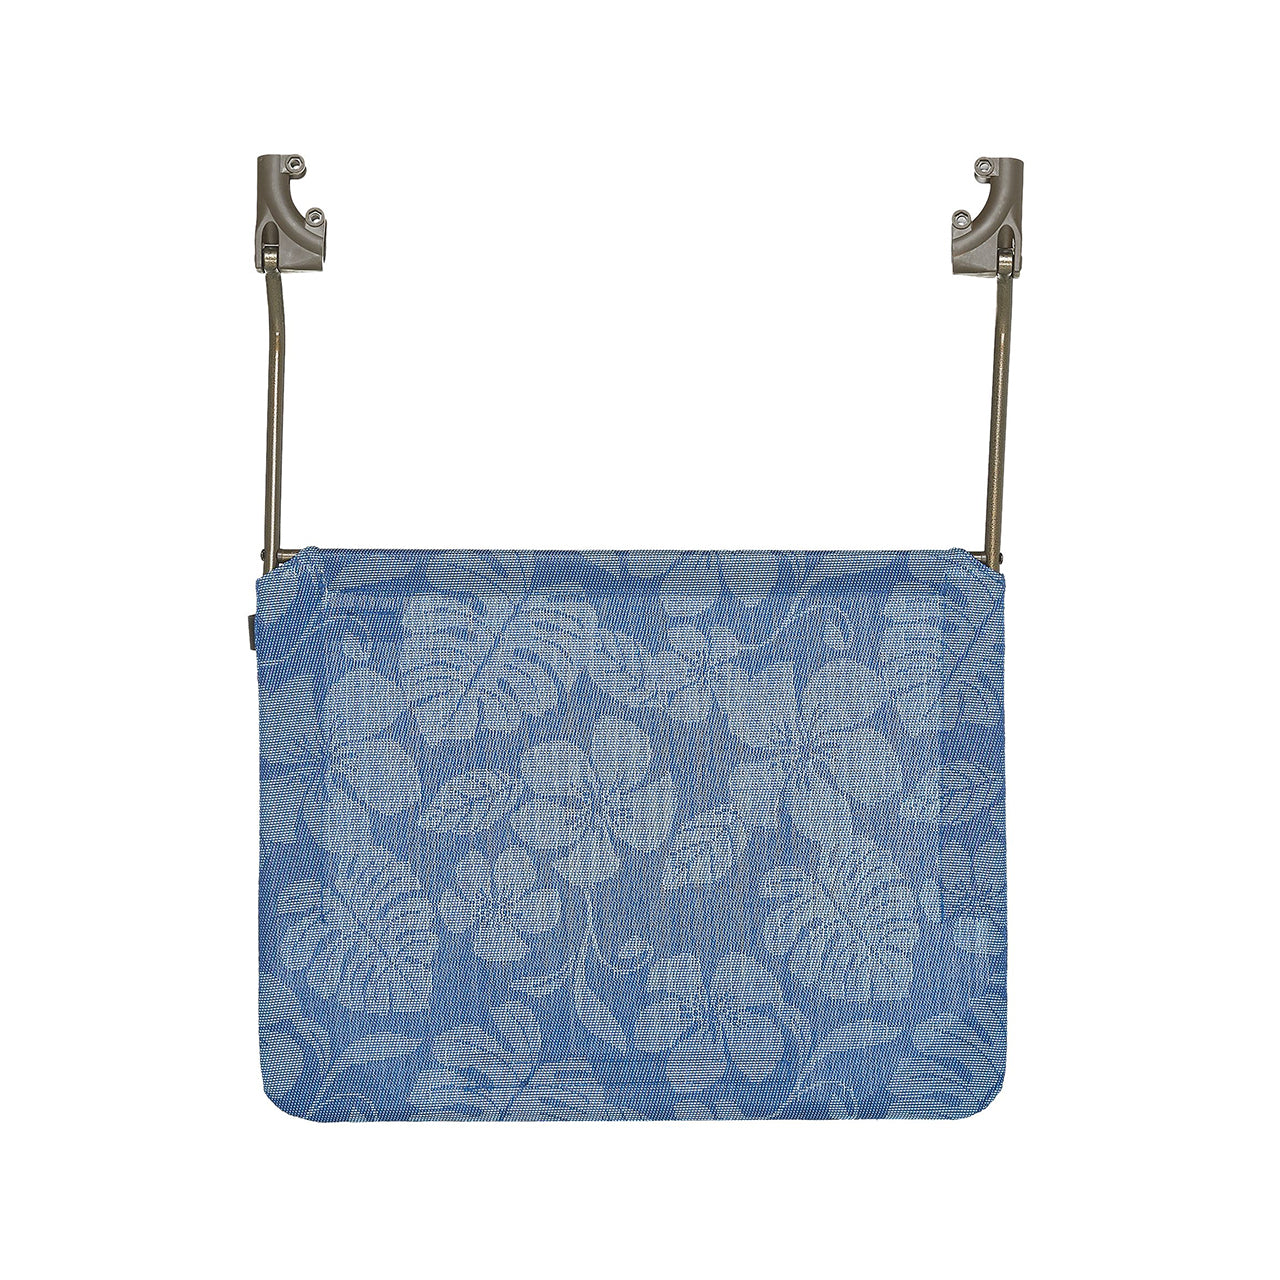 Bliss Hammocks Canopy for 26-inch Zero Gravity Chair in the blue flowers variation.